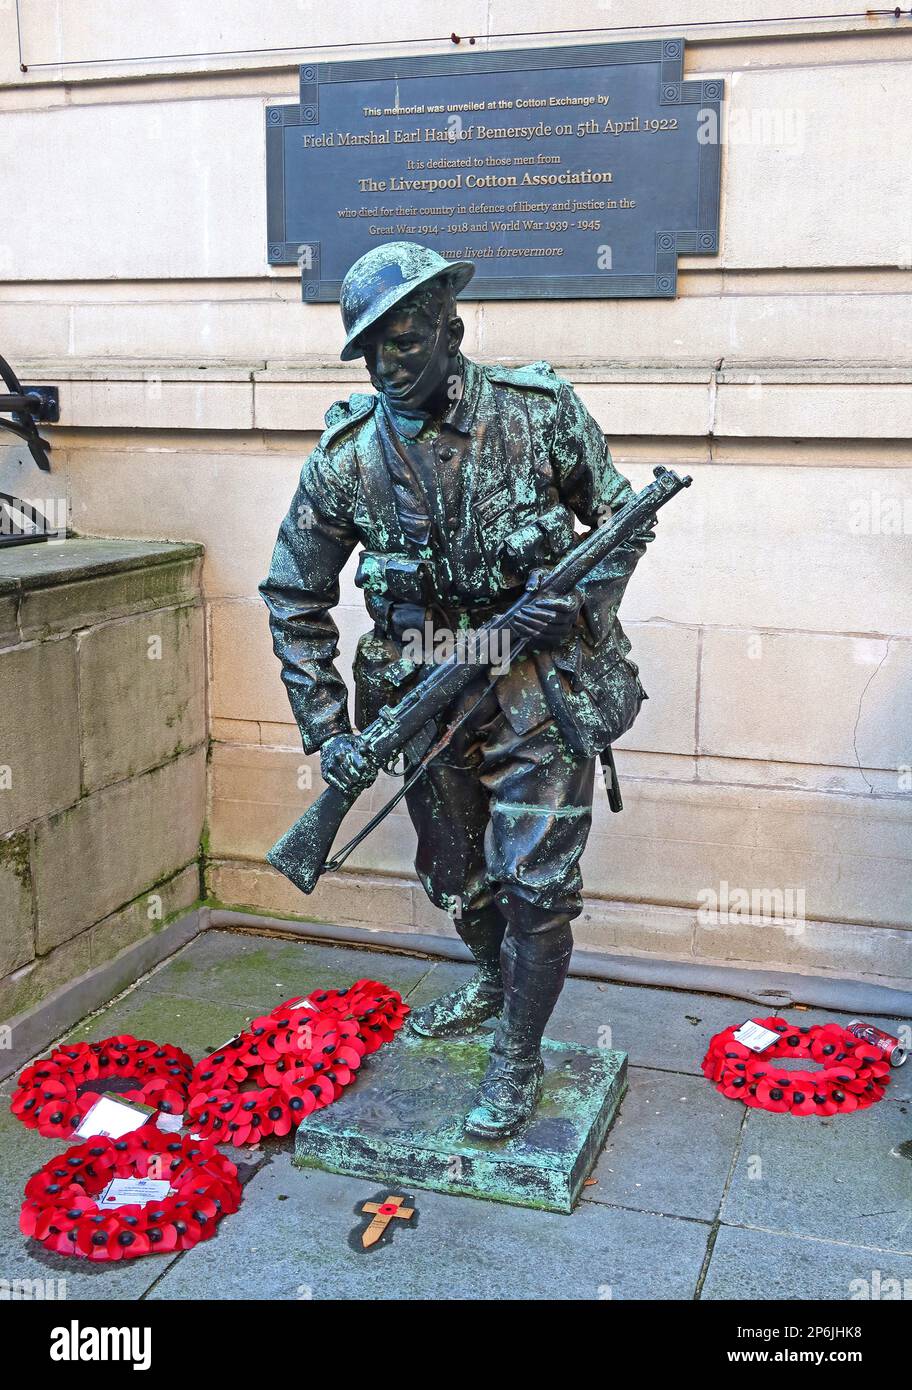 1922 Liverpool Cotton Association memorial at Exchange Flags, Liverpool, Merseyside, England, UK, L2 3YL,Marshal The Earl Haig Stock Photo